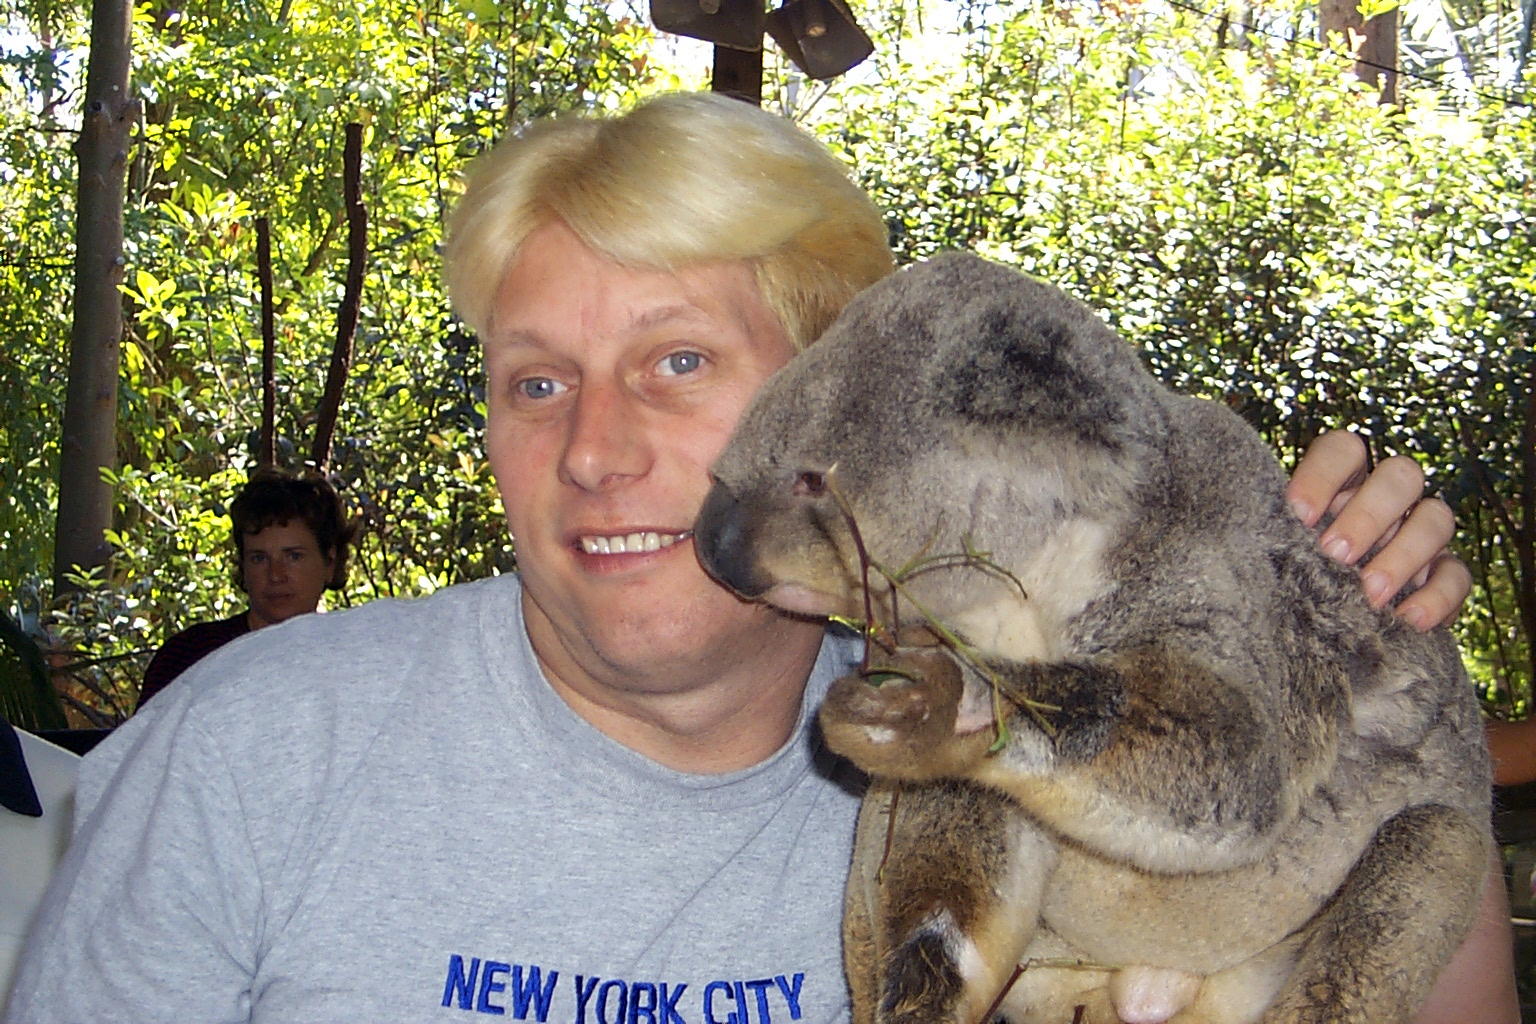 Dennis is being kissed by a Koala